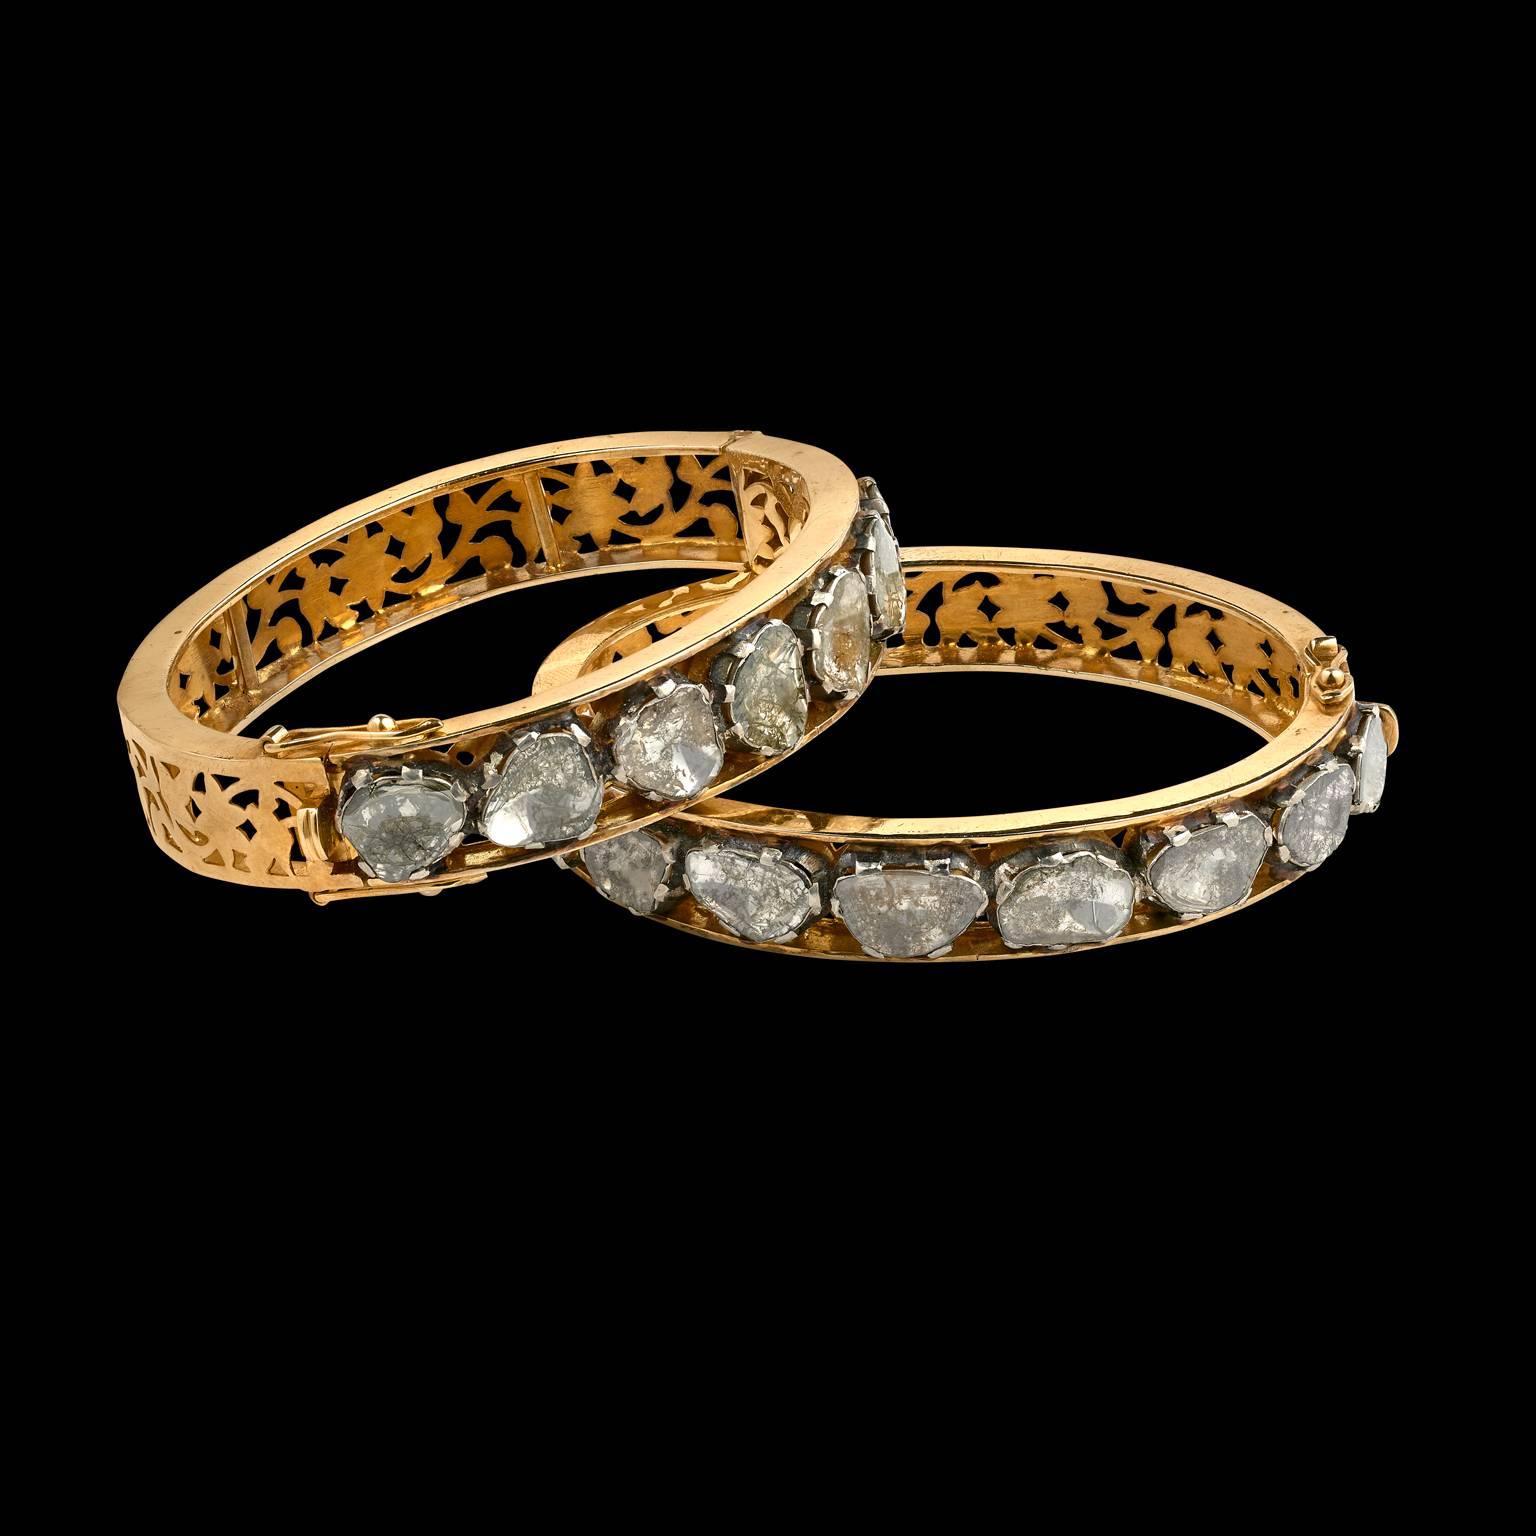 A Pair of Bracelets
North India
Modern

Fabricated from silver and gold, set with old style table-cut diamonds in silver foil on the front. The back and interior of the bracelets embellished with cut-work design.
